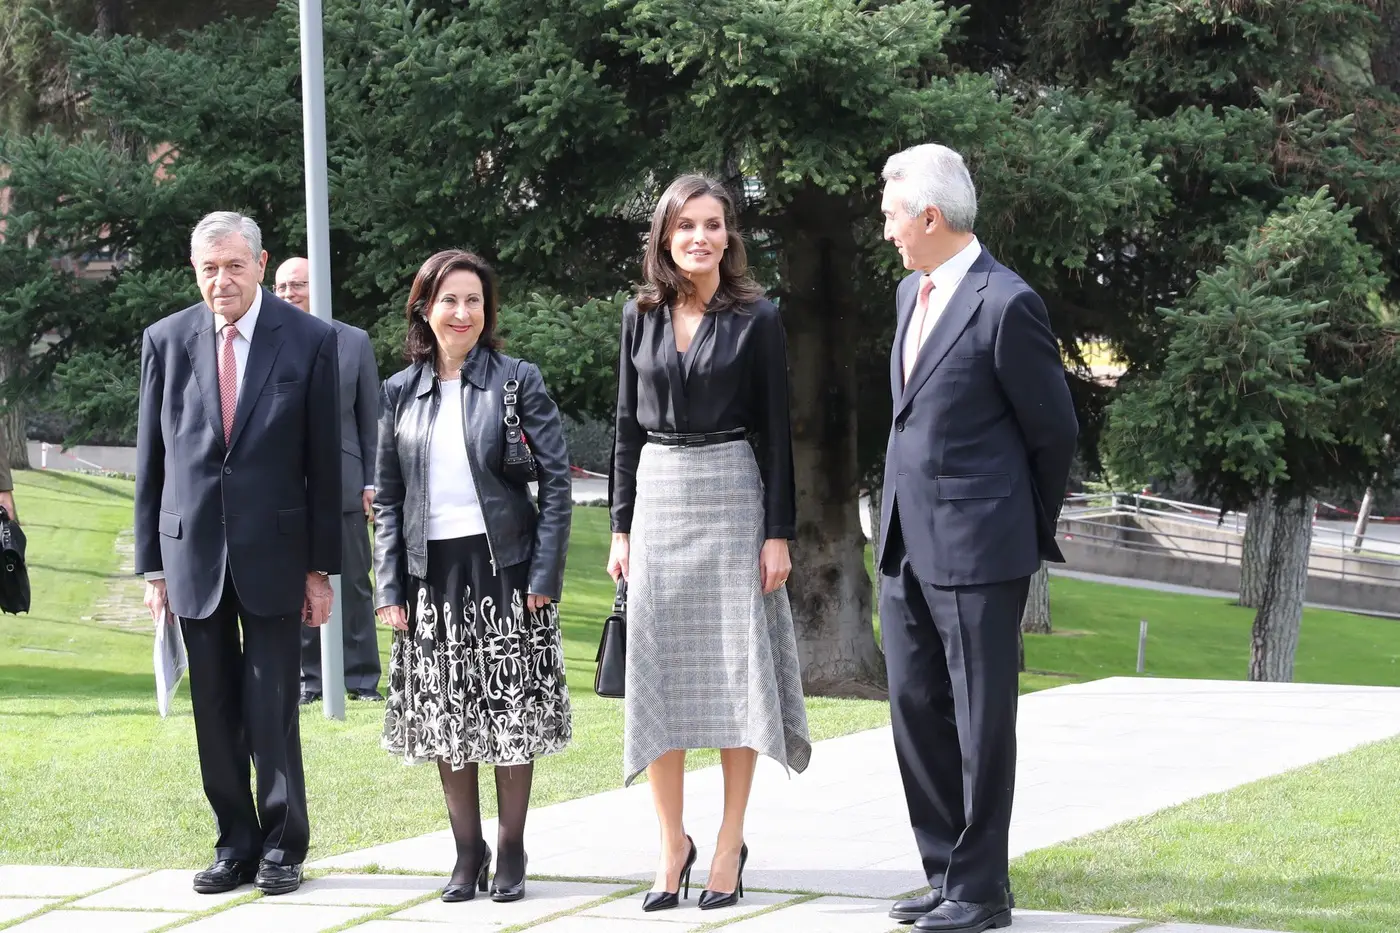 Queen Letizia of Spain presented friendship awards wearing black blouse and gray skirt